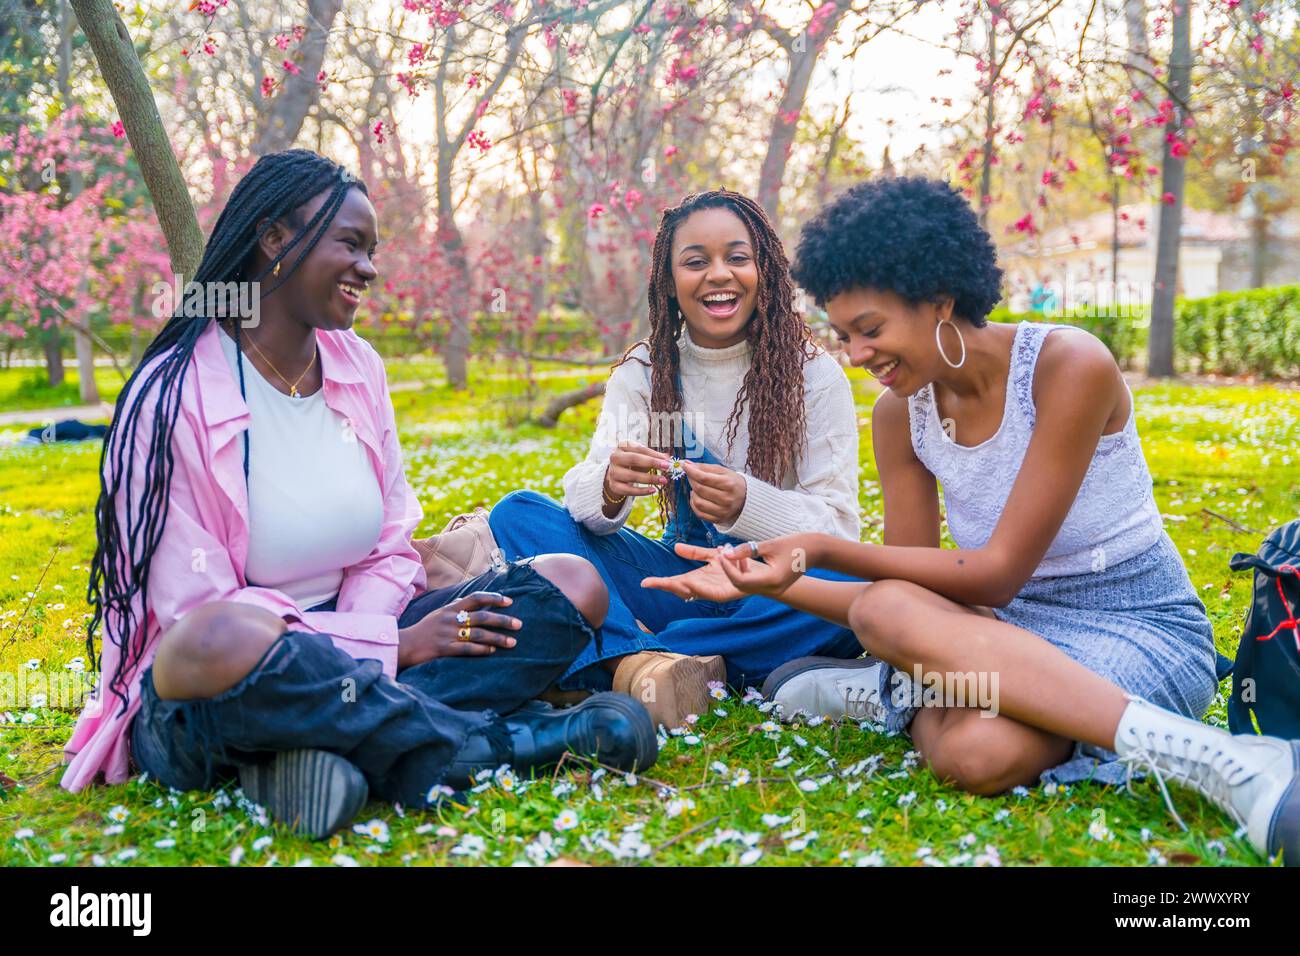 Playful african young women messing with flowers sitting on the grass in a park Stock Photo